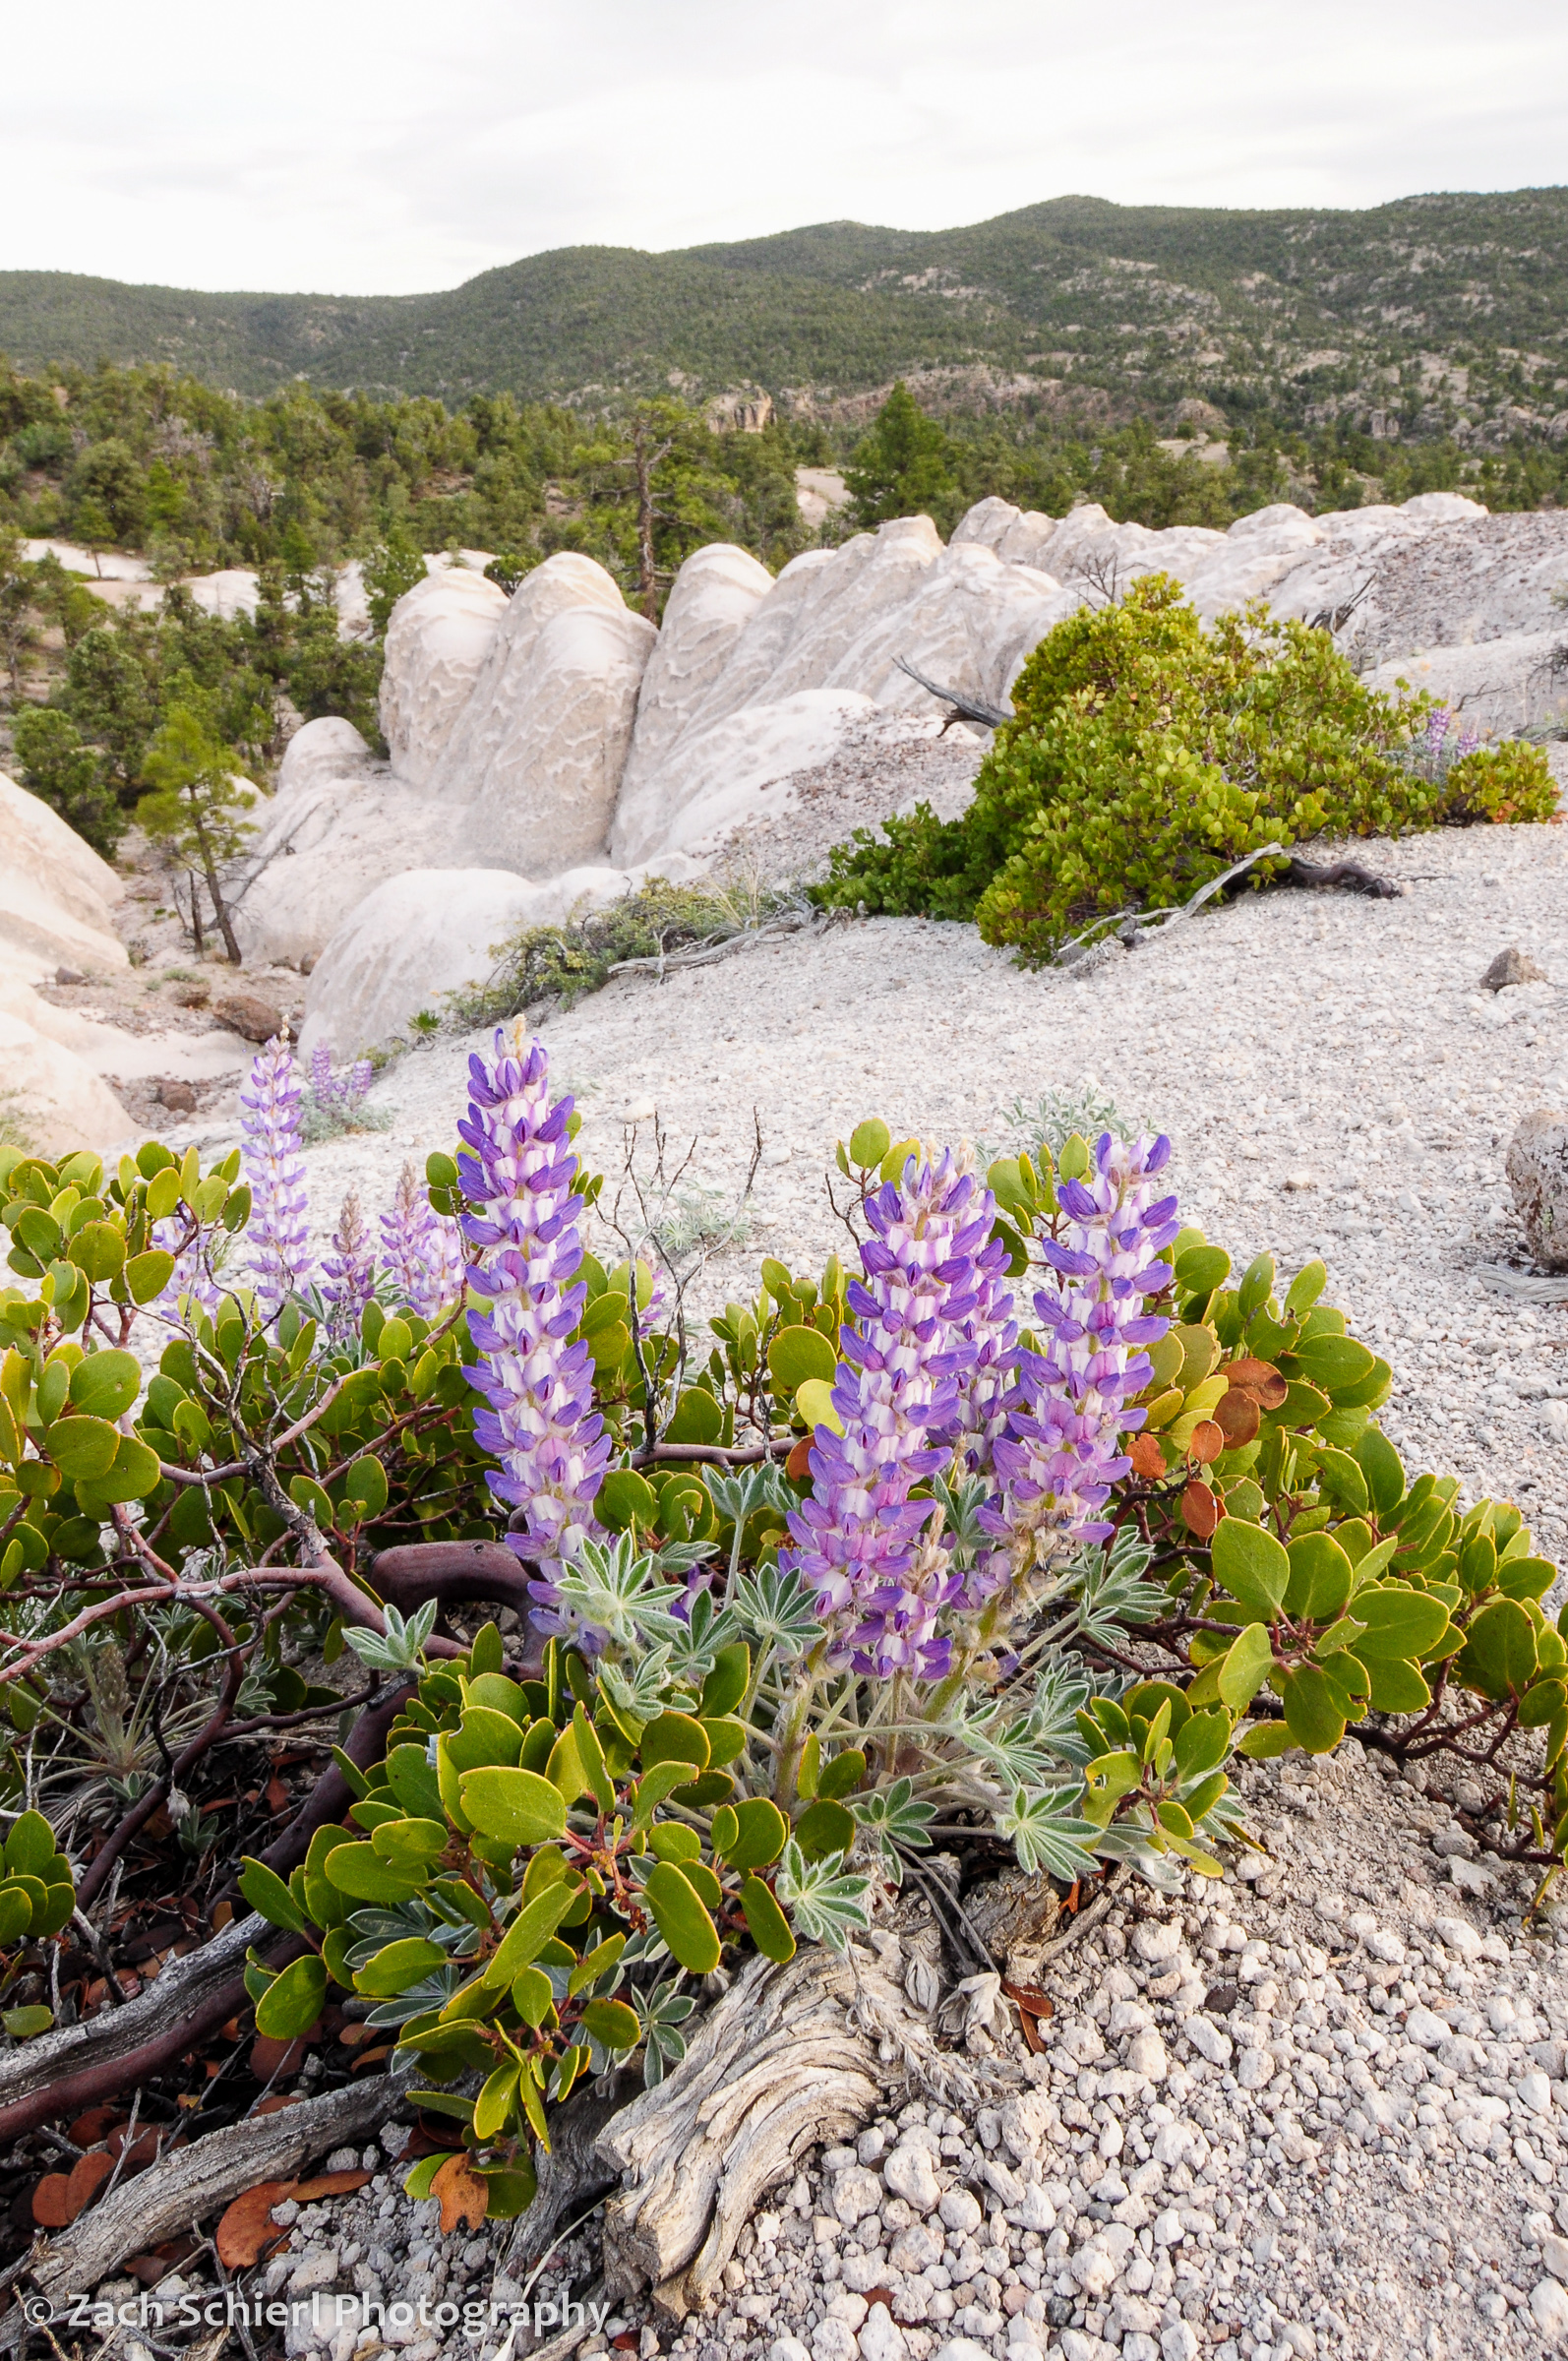 Purple flowers growing from within a green plant and white rocks in the background